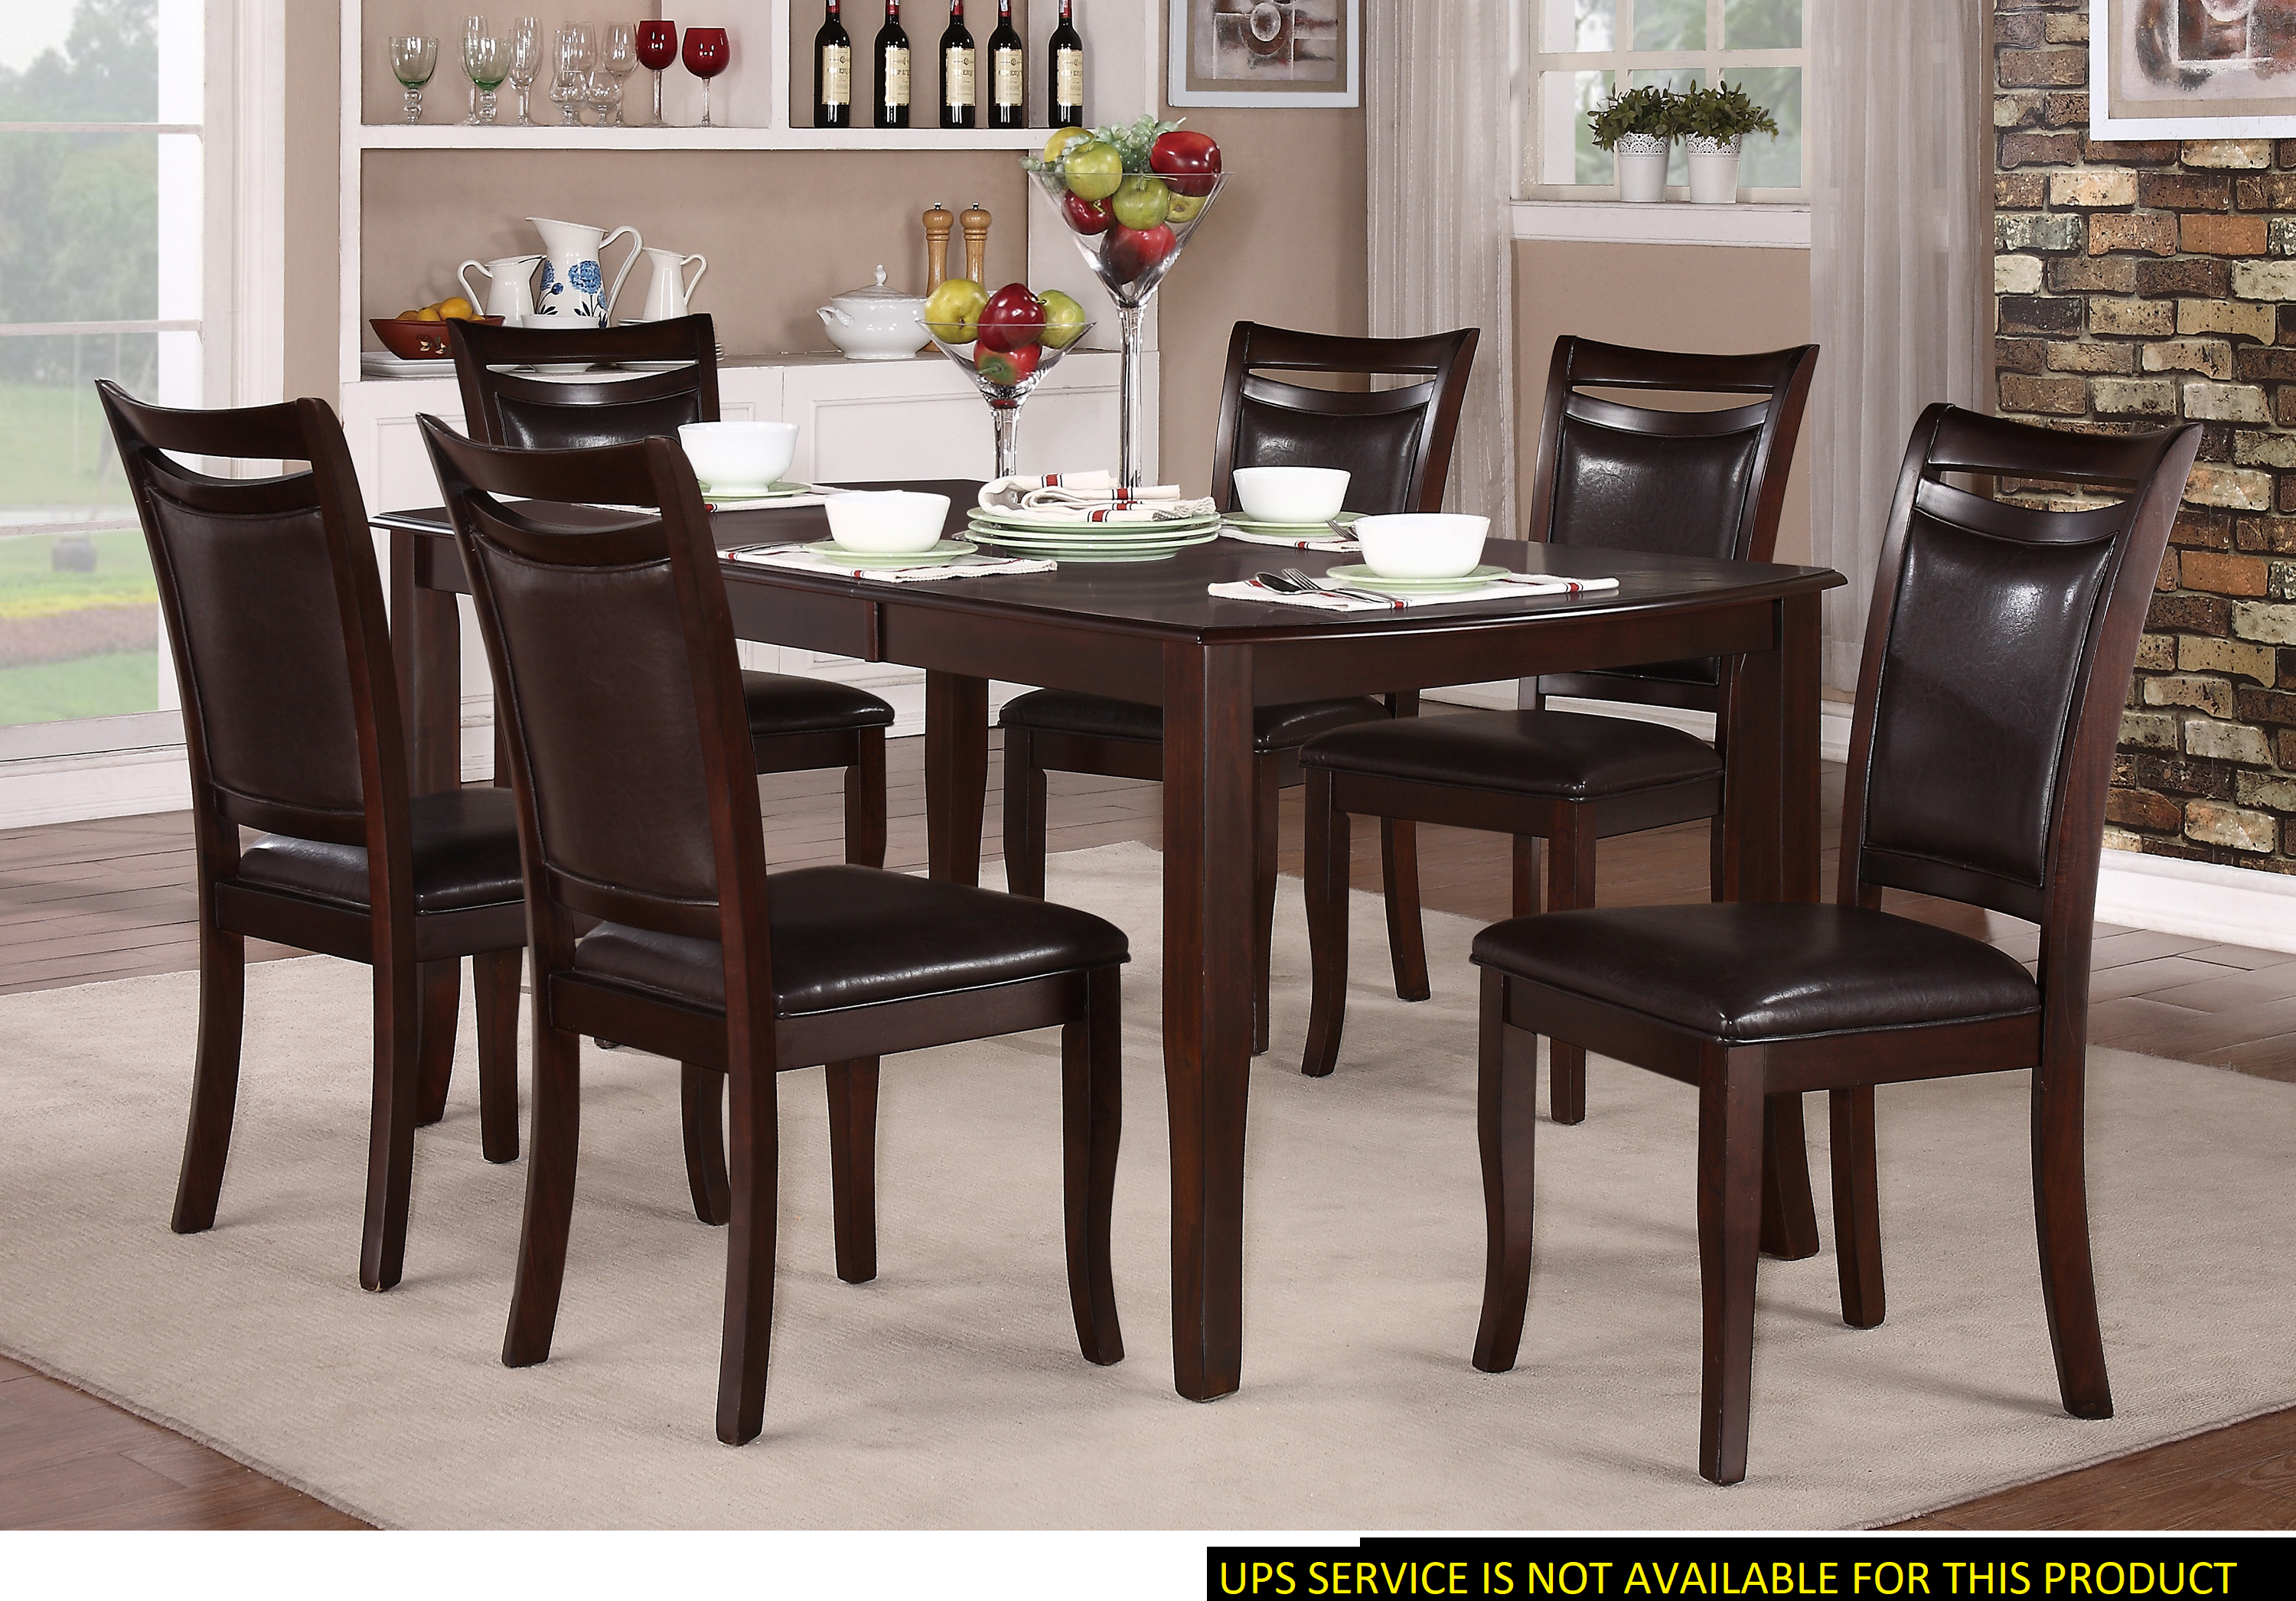 Dining Room Set of 7 Table with Extension Leaf 6x side Chairs (Brown)